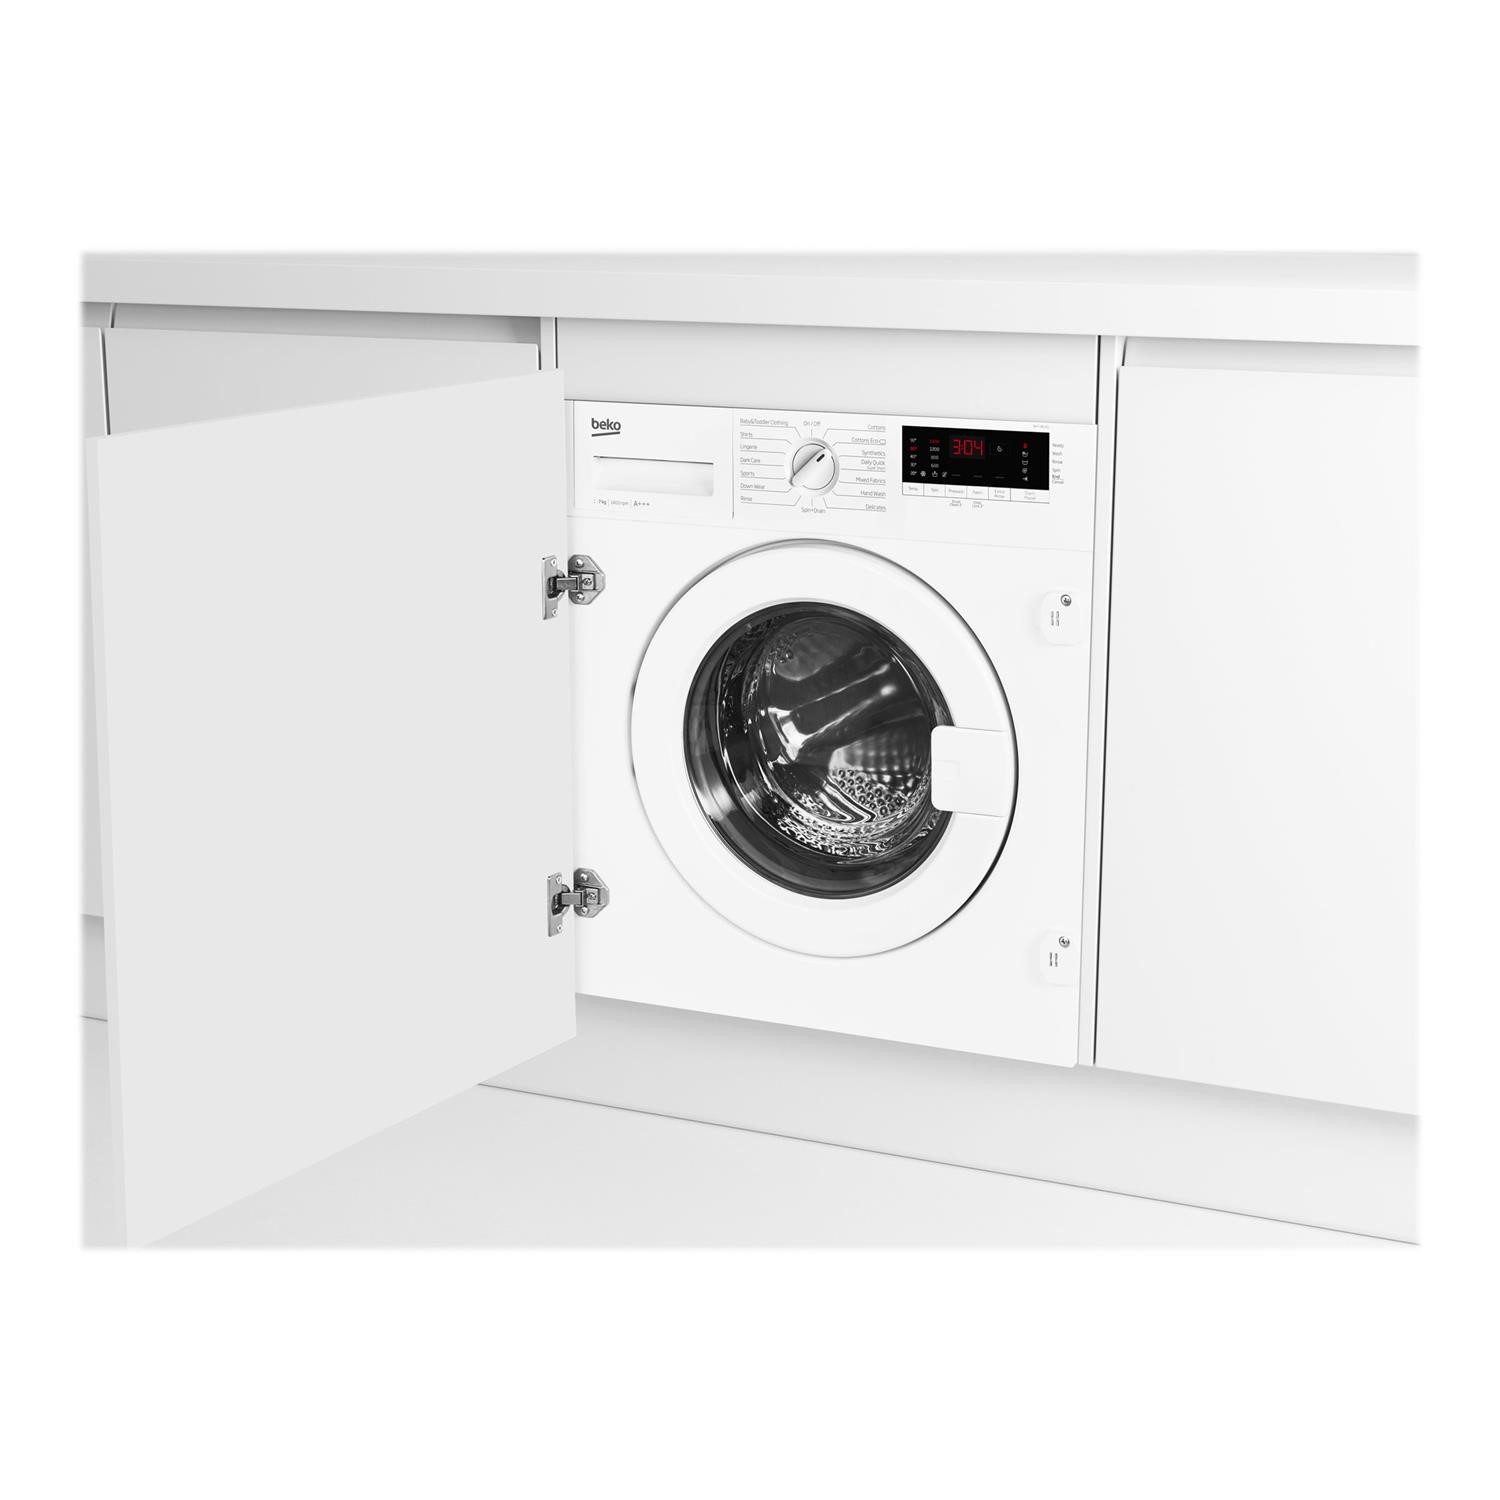 7Kg 1400 Spin Built In Washing Machine with LED Display in White Beko WIY74545 A++ 